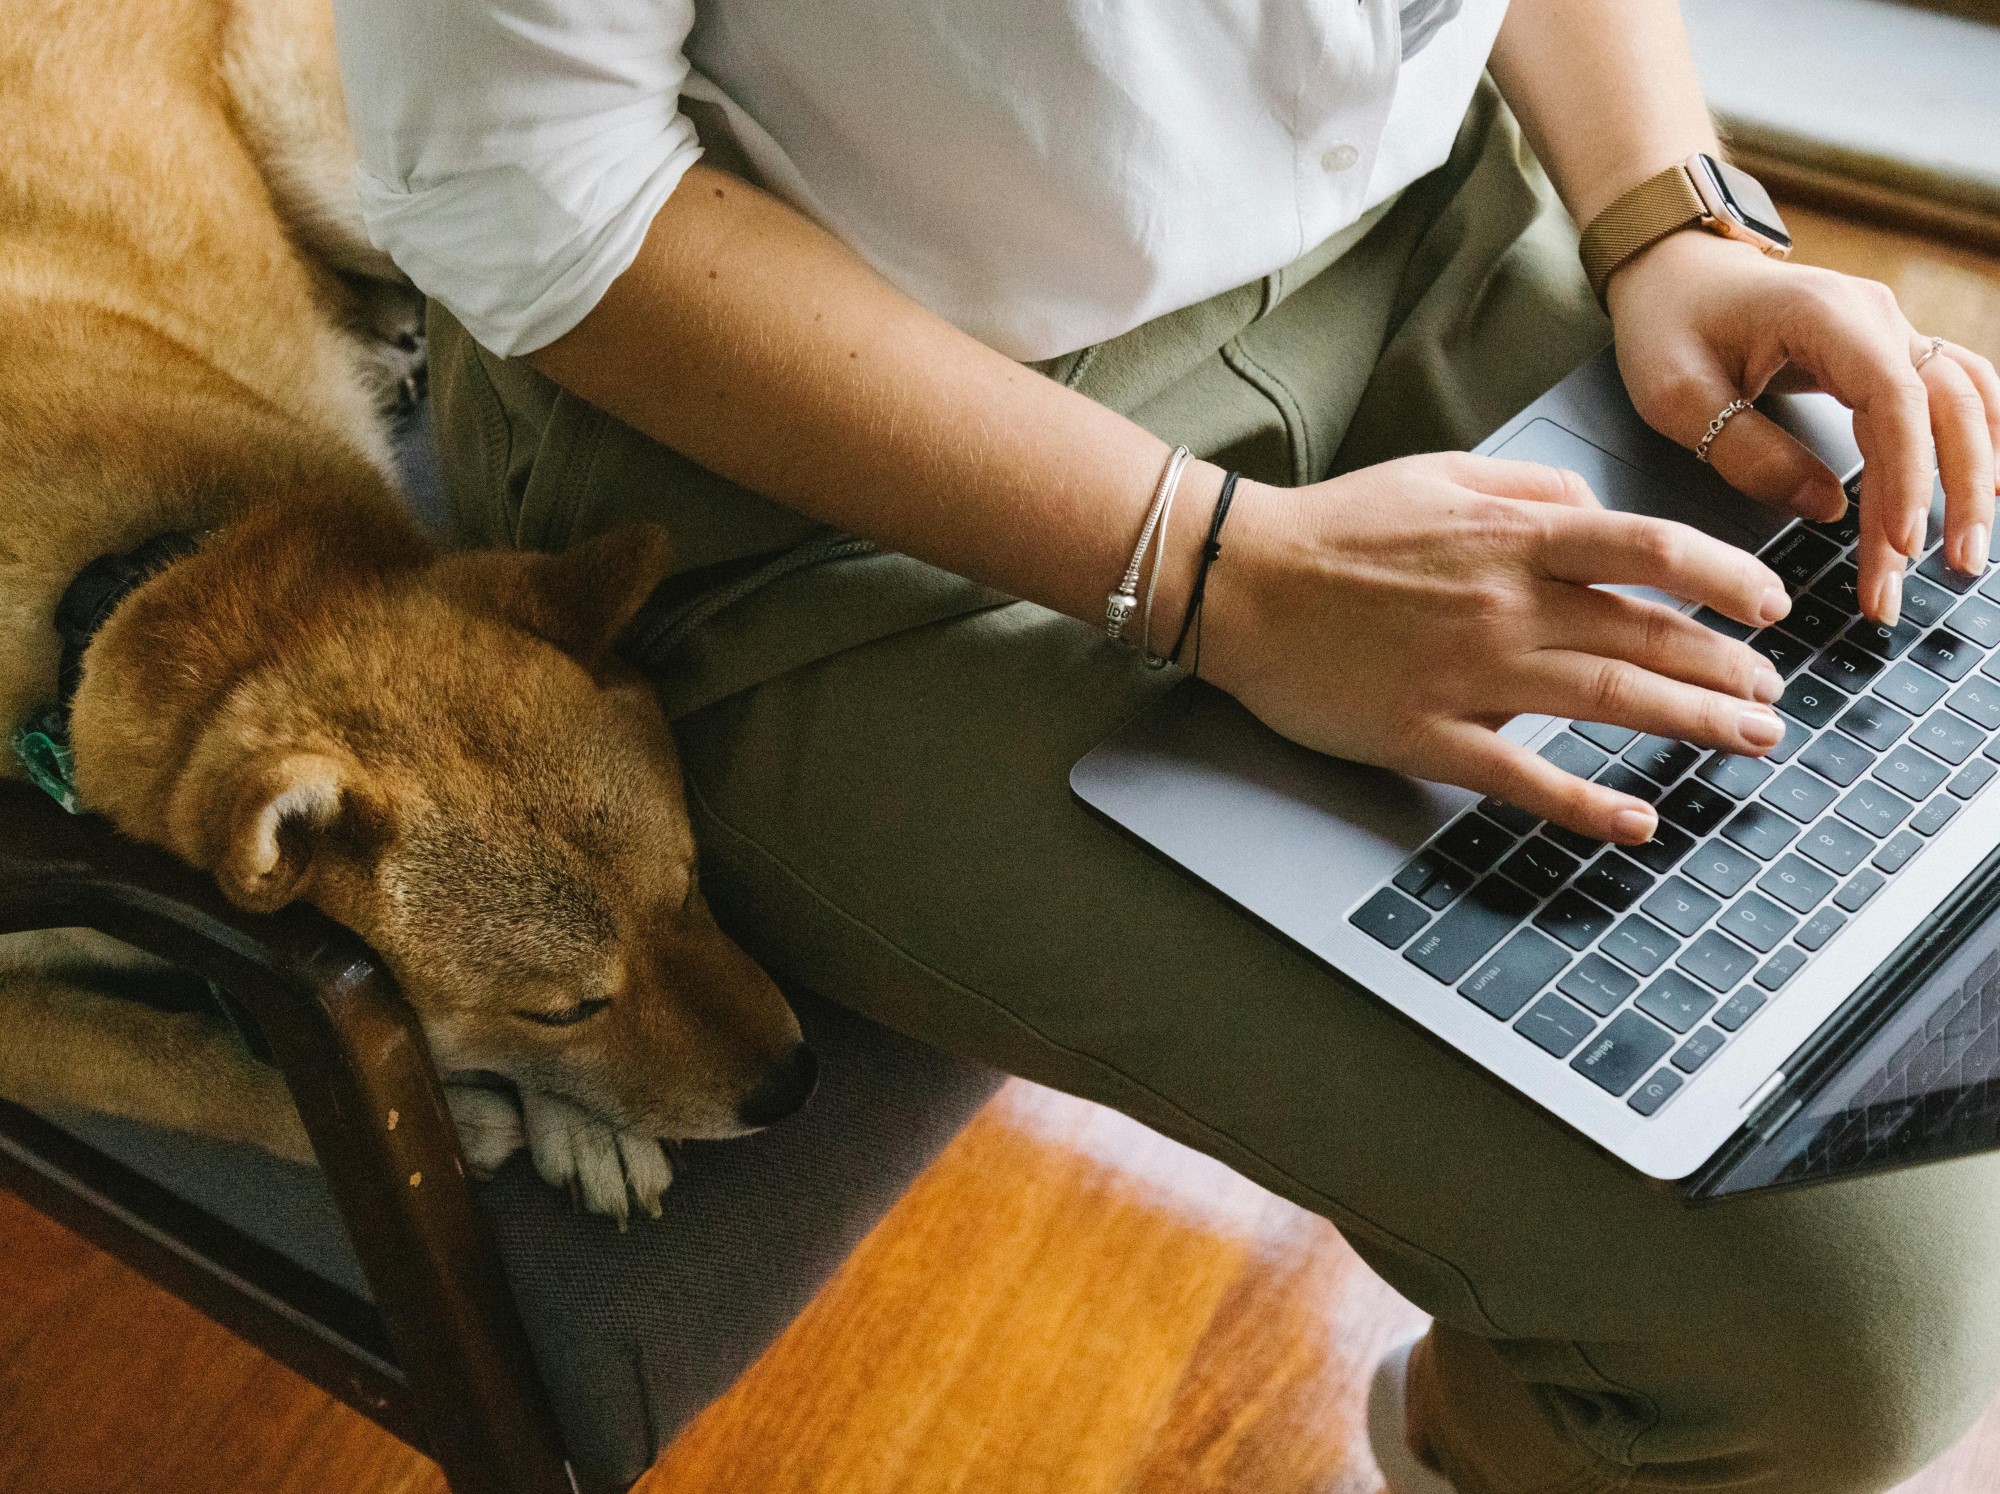 A small brown dog lays on a chair next to a person typing on a laptop